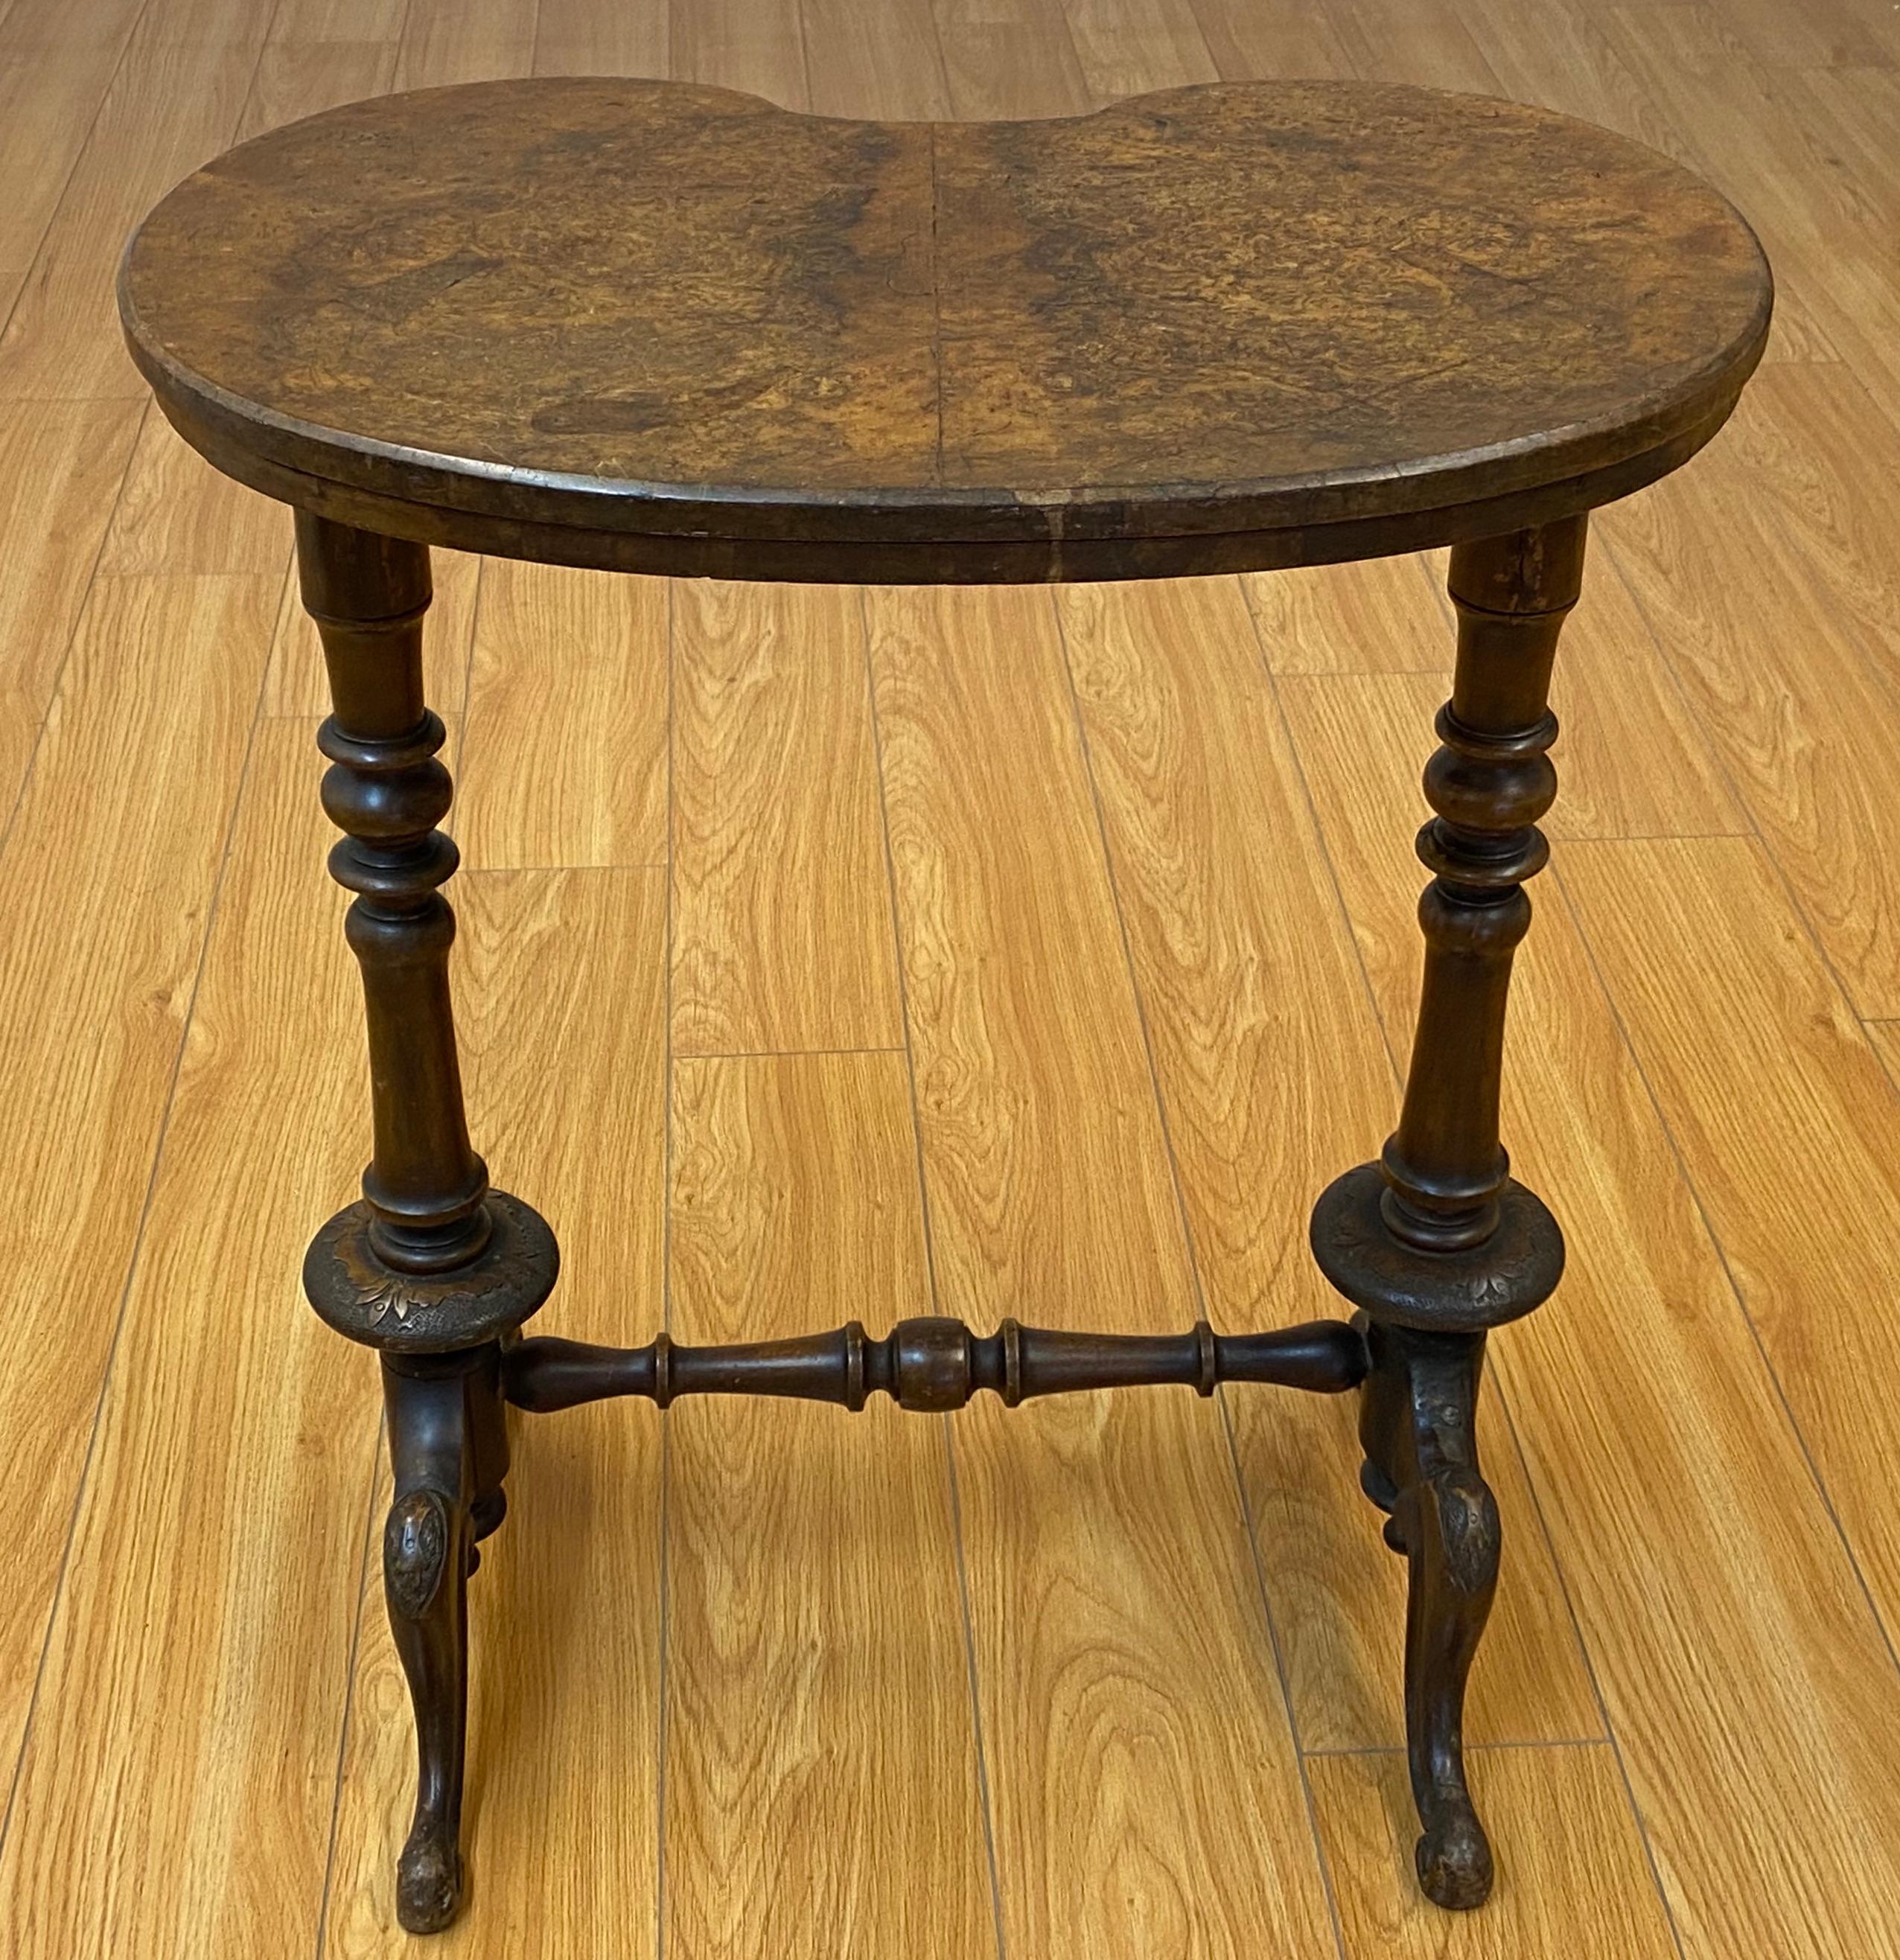 19th century English walnut kidney shaped side table c.1880

Hand carved - Pokerwork carving - Custom made

The table shows some past repairs to the base (please see images)

23